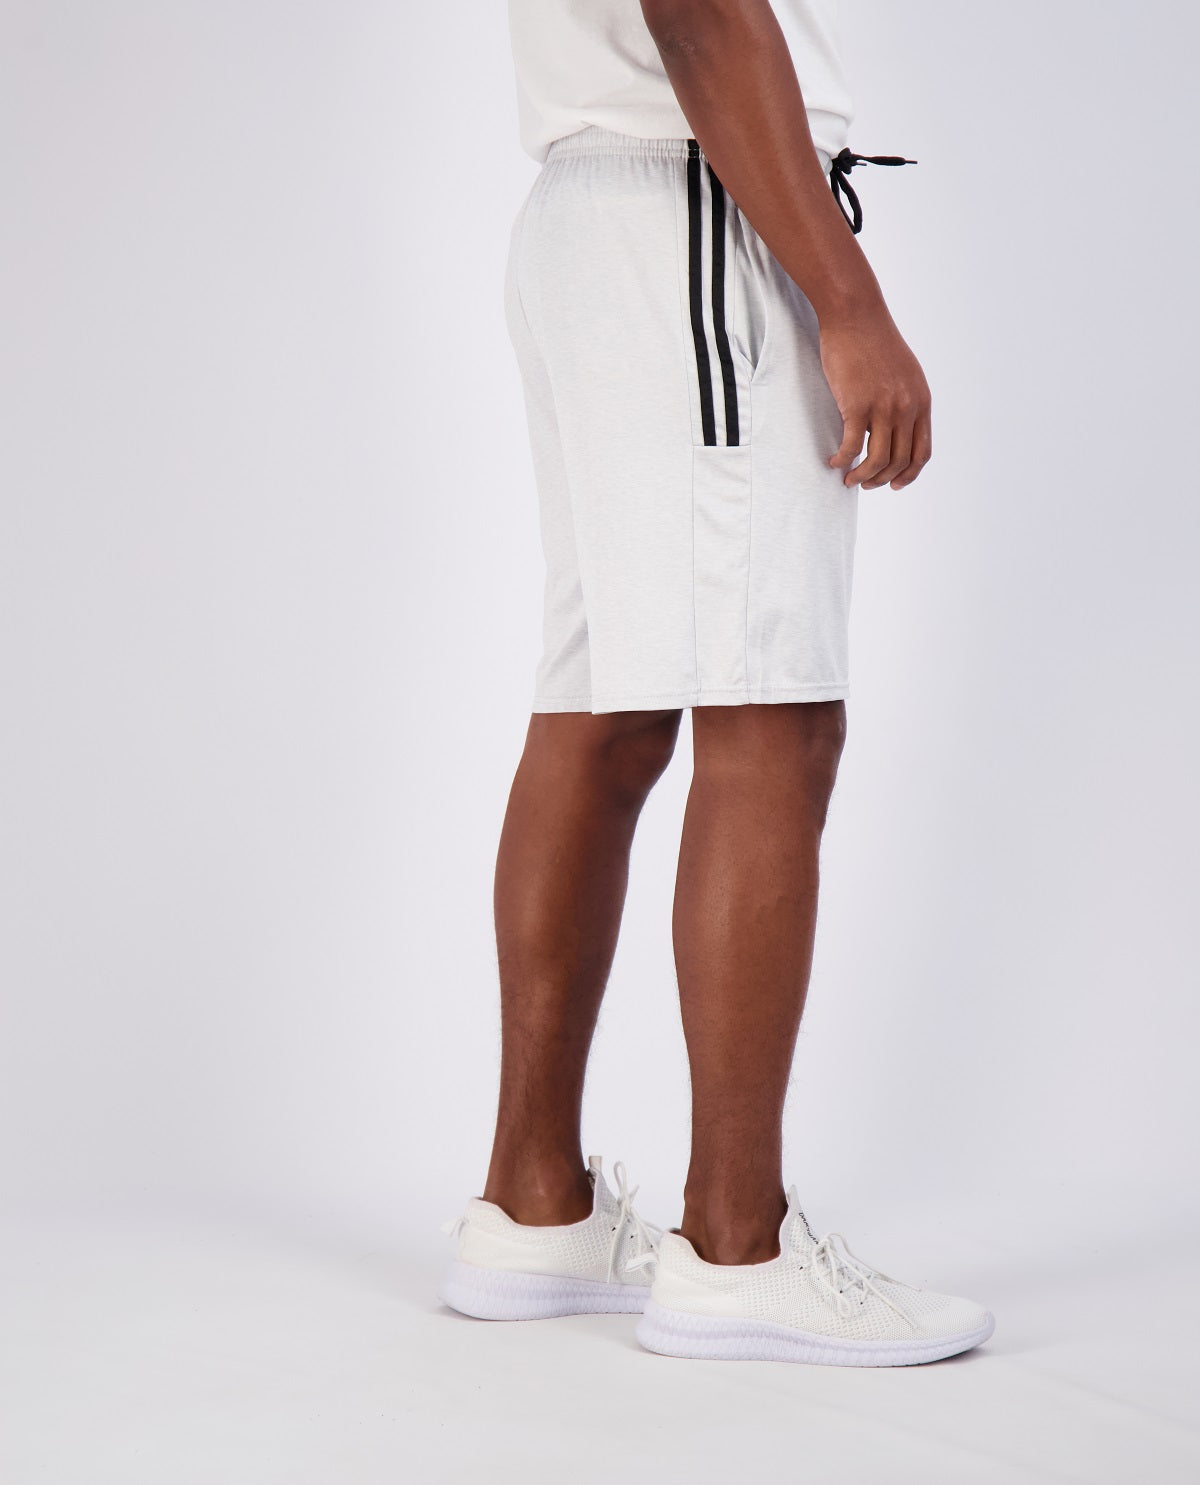 Real Essentials Dry Fit Short